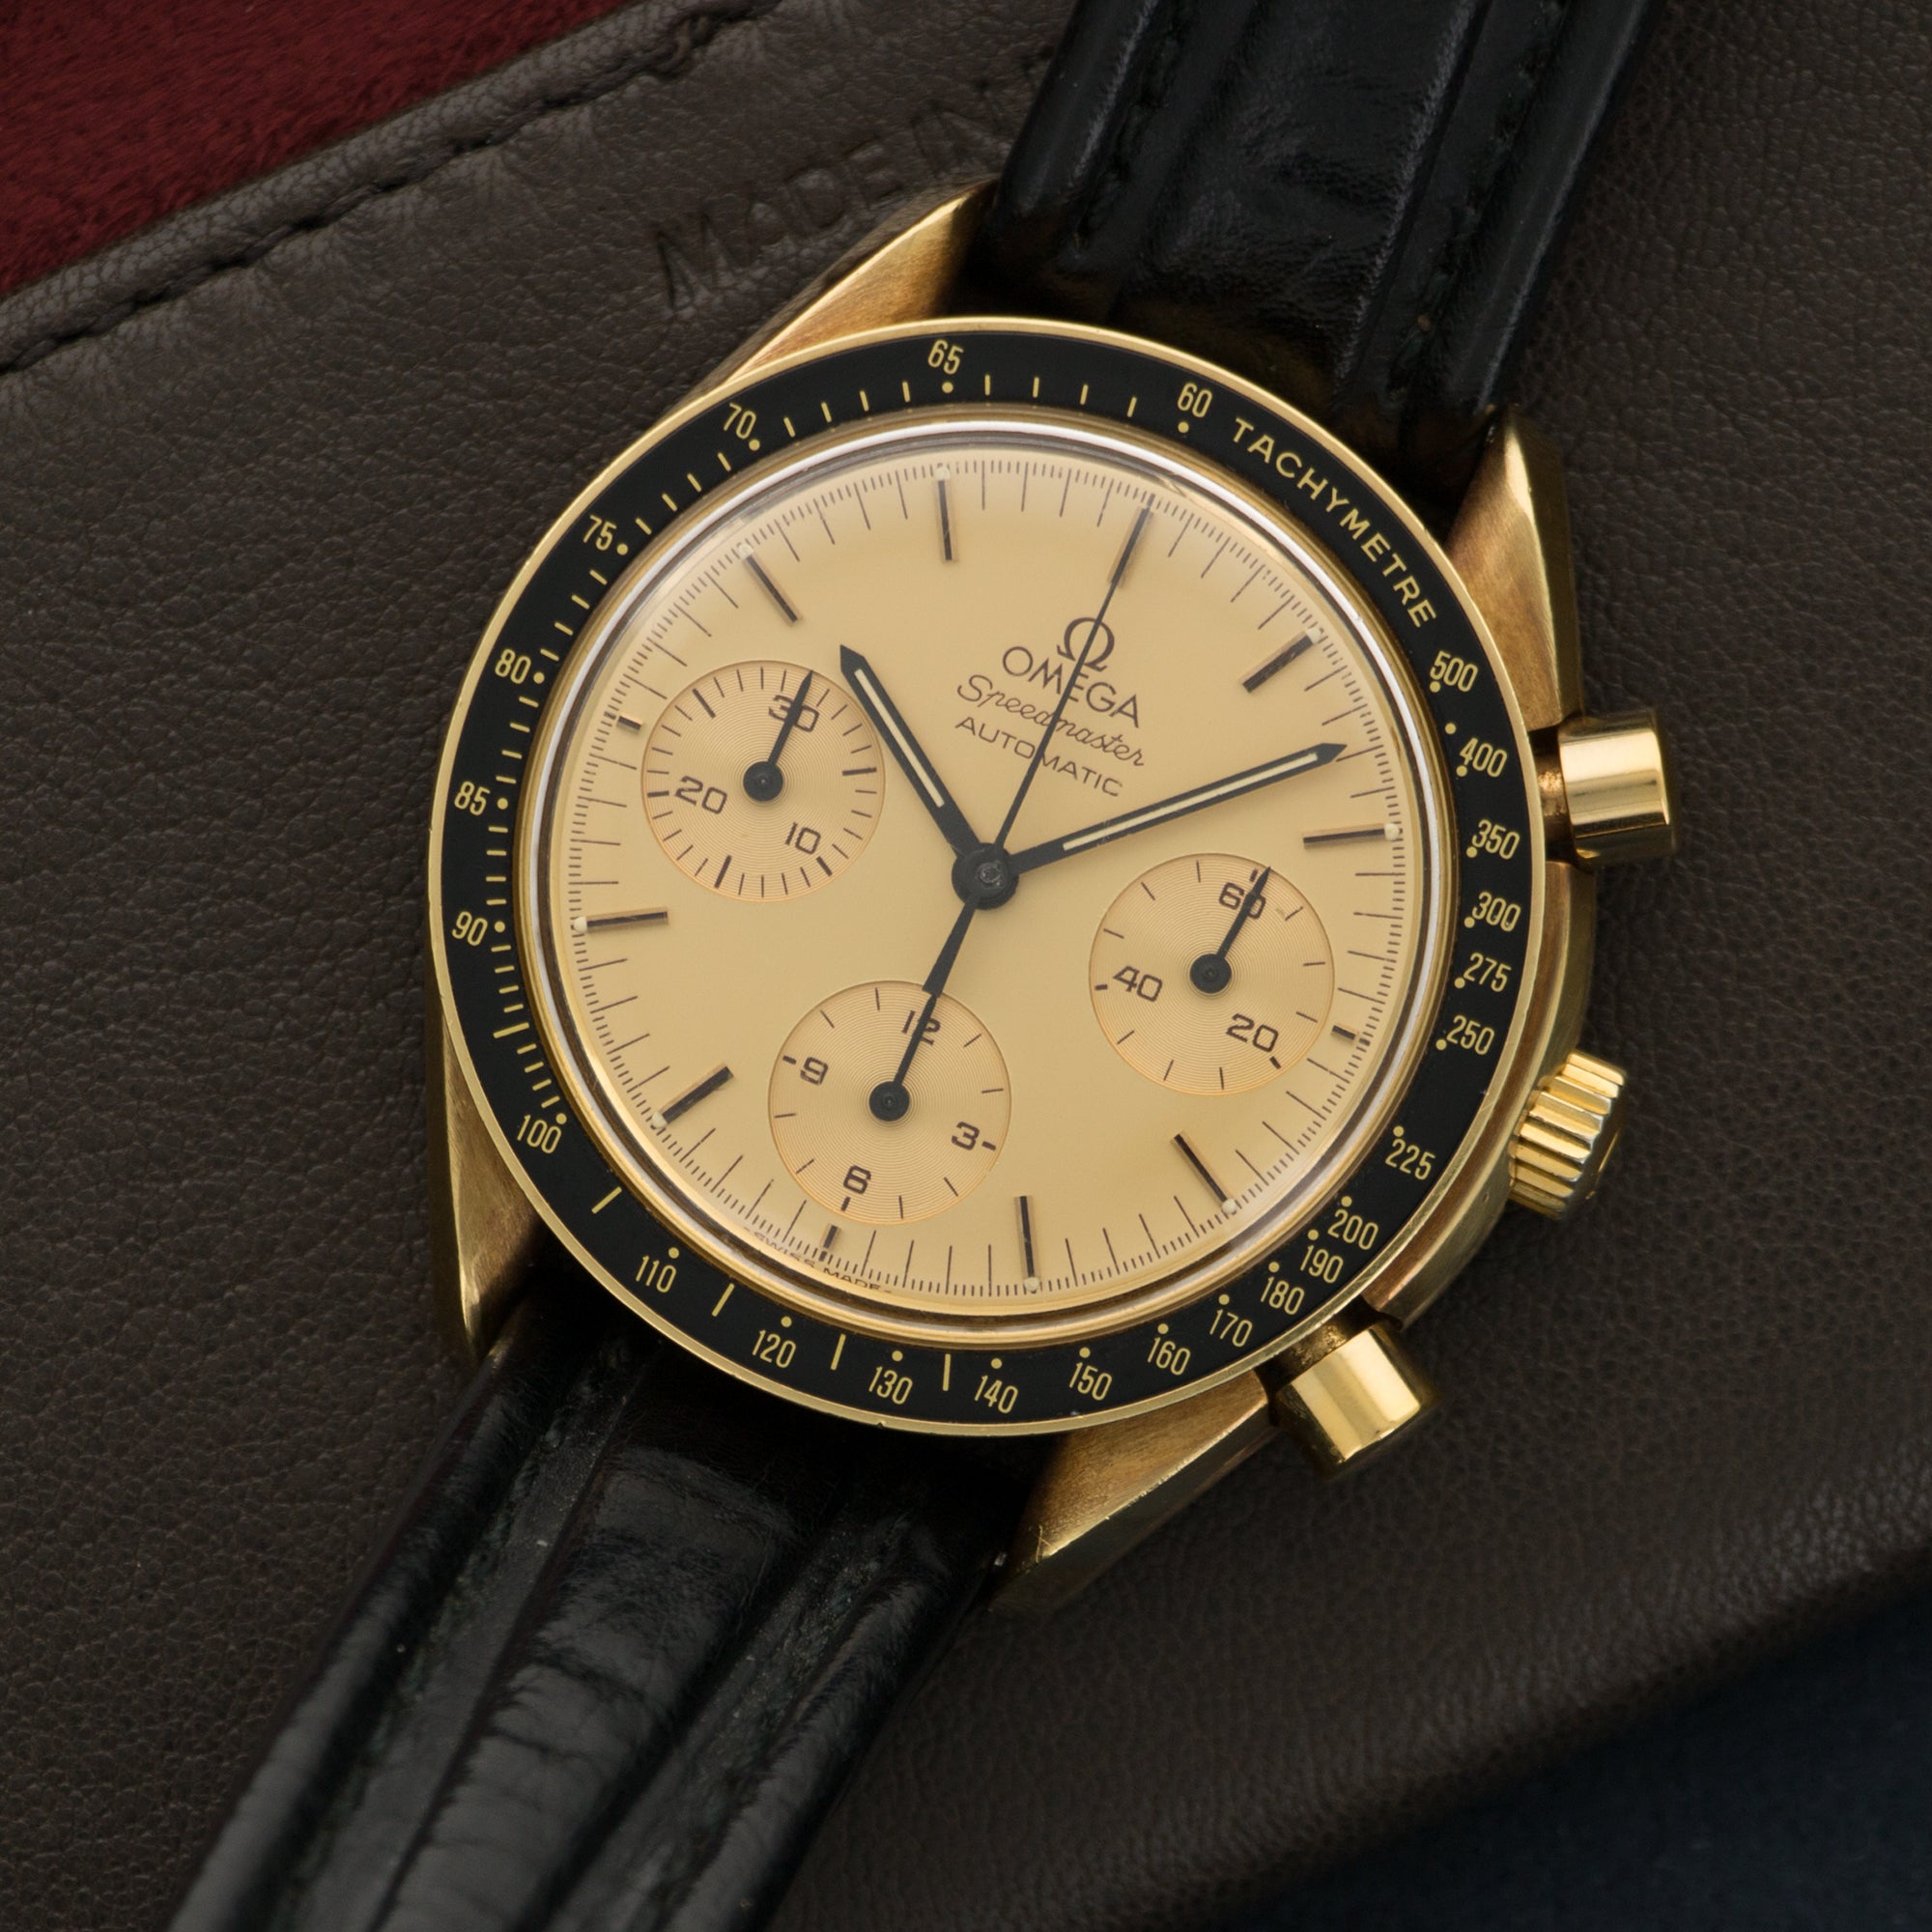 Omega - Omega Yellow Gold Speedmaster Strap Watch - The Keystone Watches